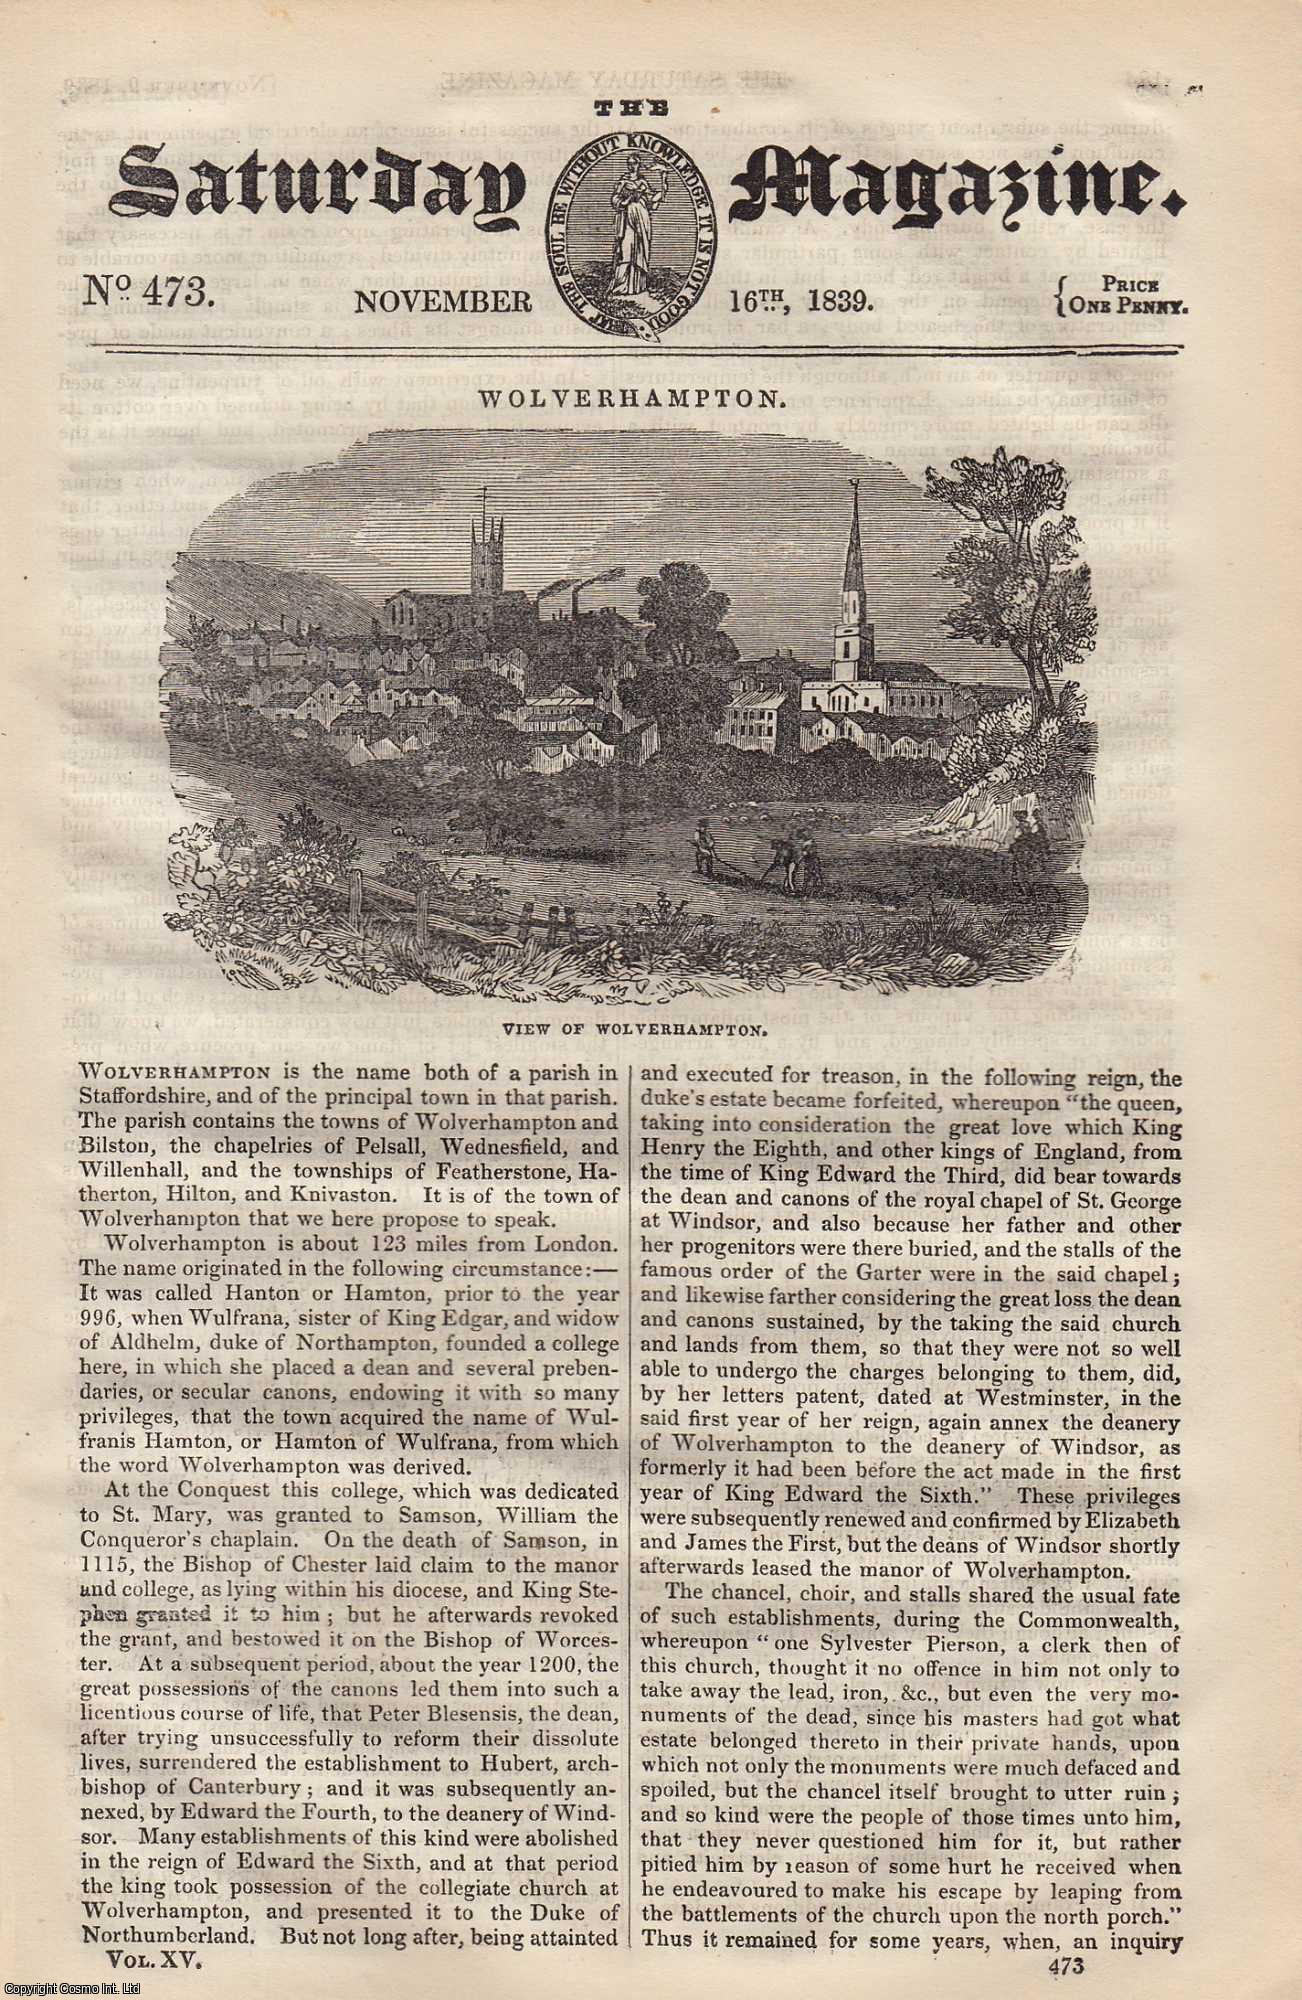 ---. - Wolverhampton; Restoration of Israel; Bays and Harbours in New Zealand, etc. Issue No. 473. November, 1839. A complete rare weekly issue of the Saturday Magazine, 1839.